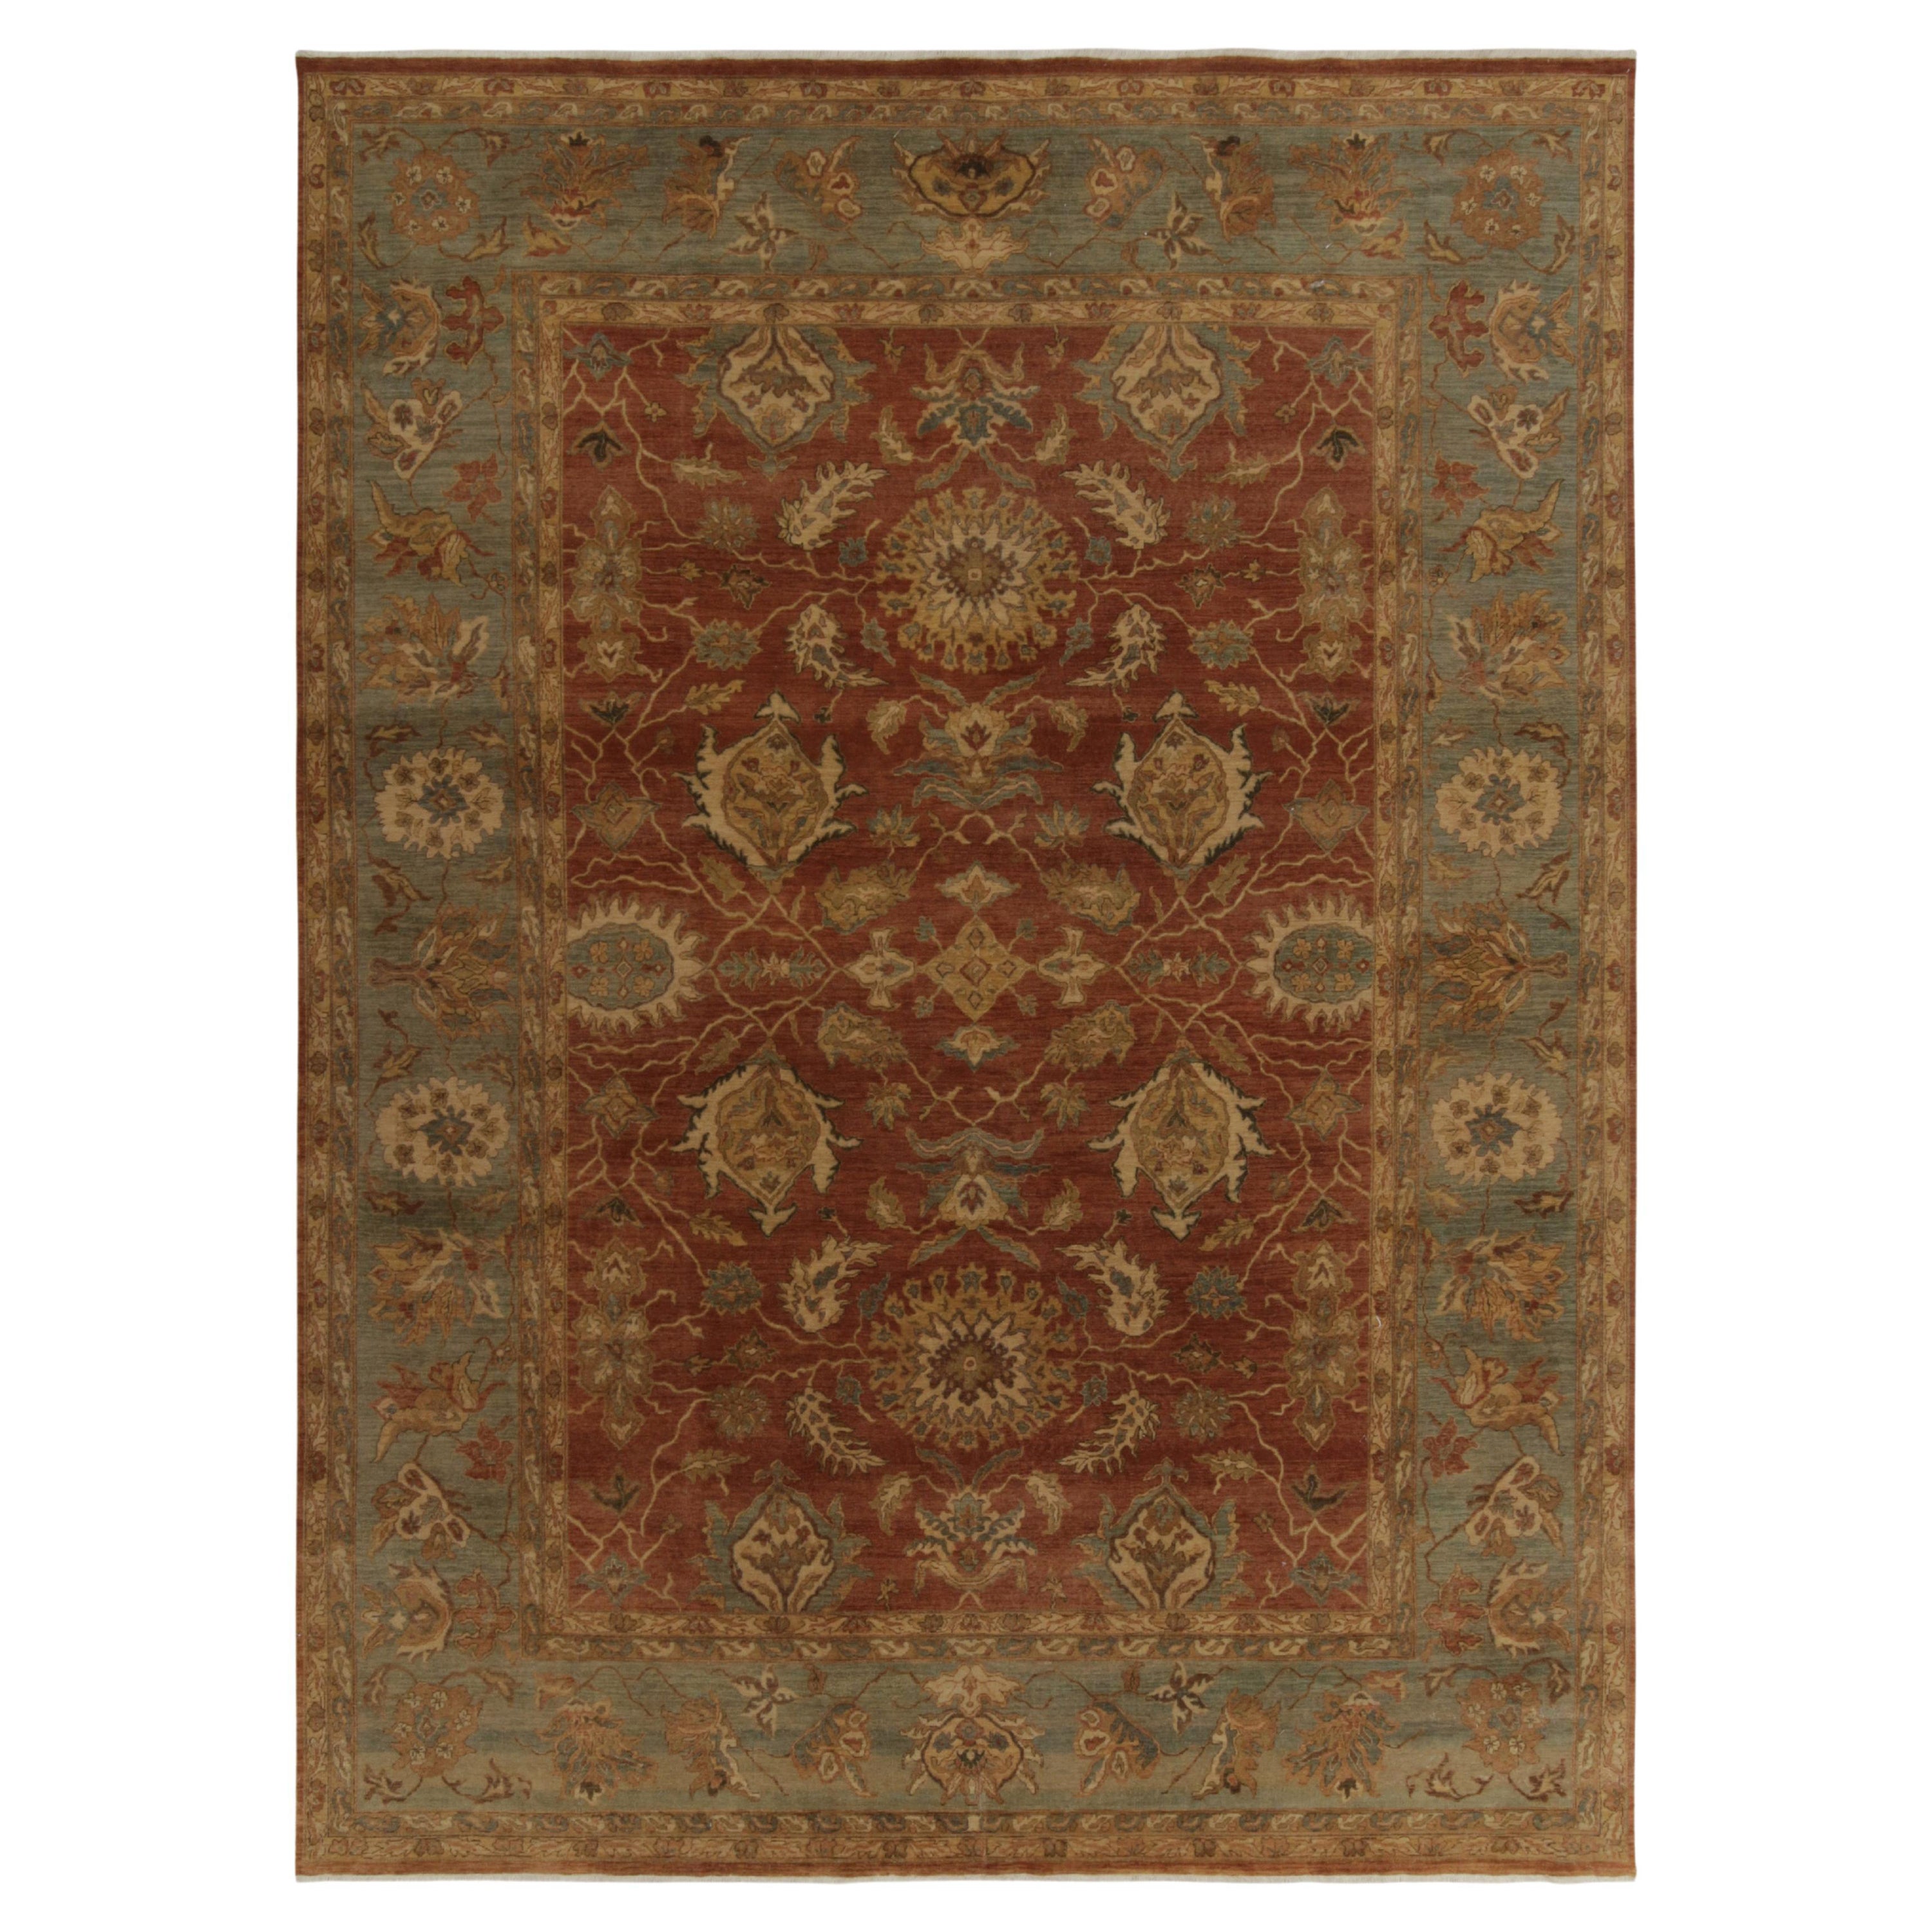 Rug & Kilim's Classic Tabriz Style Rug with Beige & Blue Florals on Rust Red For Sale